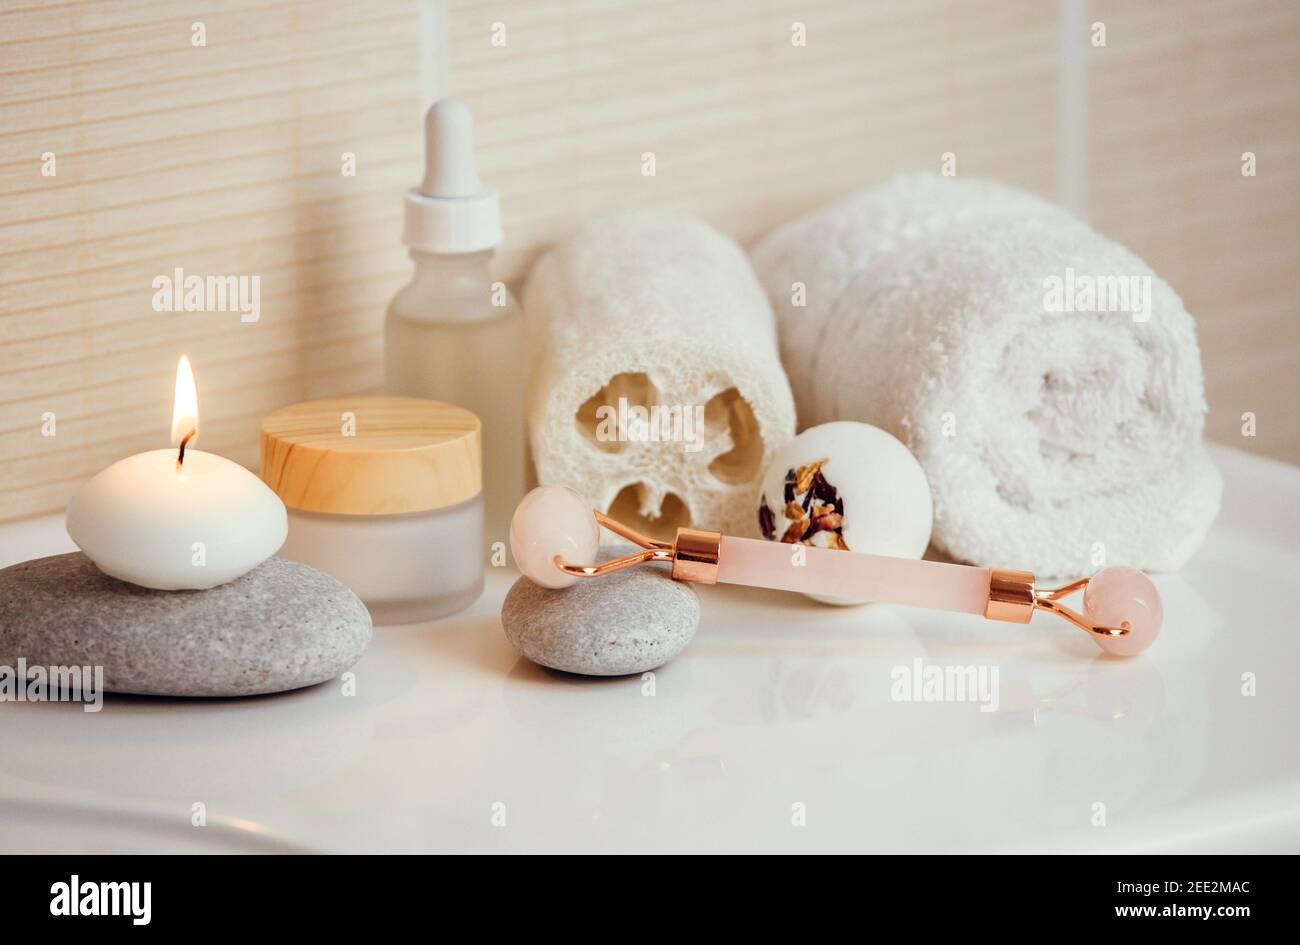 Home spa self care products in bathroom, facial massage rolling tool, moisturizing creams and oil, creamy bath bomb with dry rose petals. Stock Photo